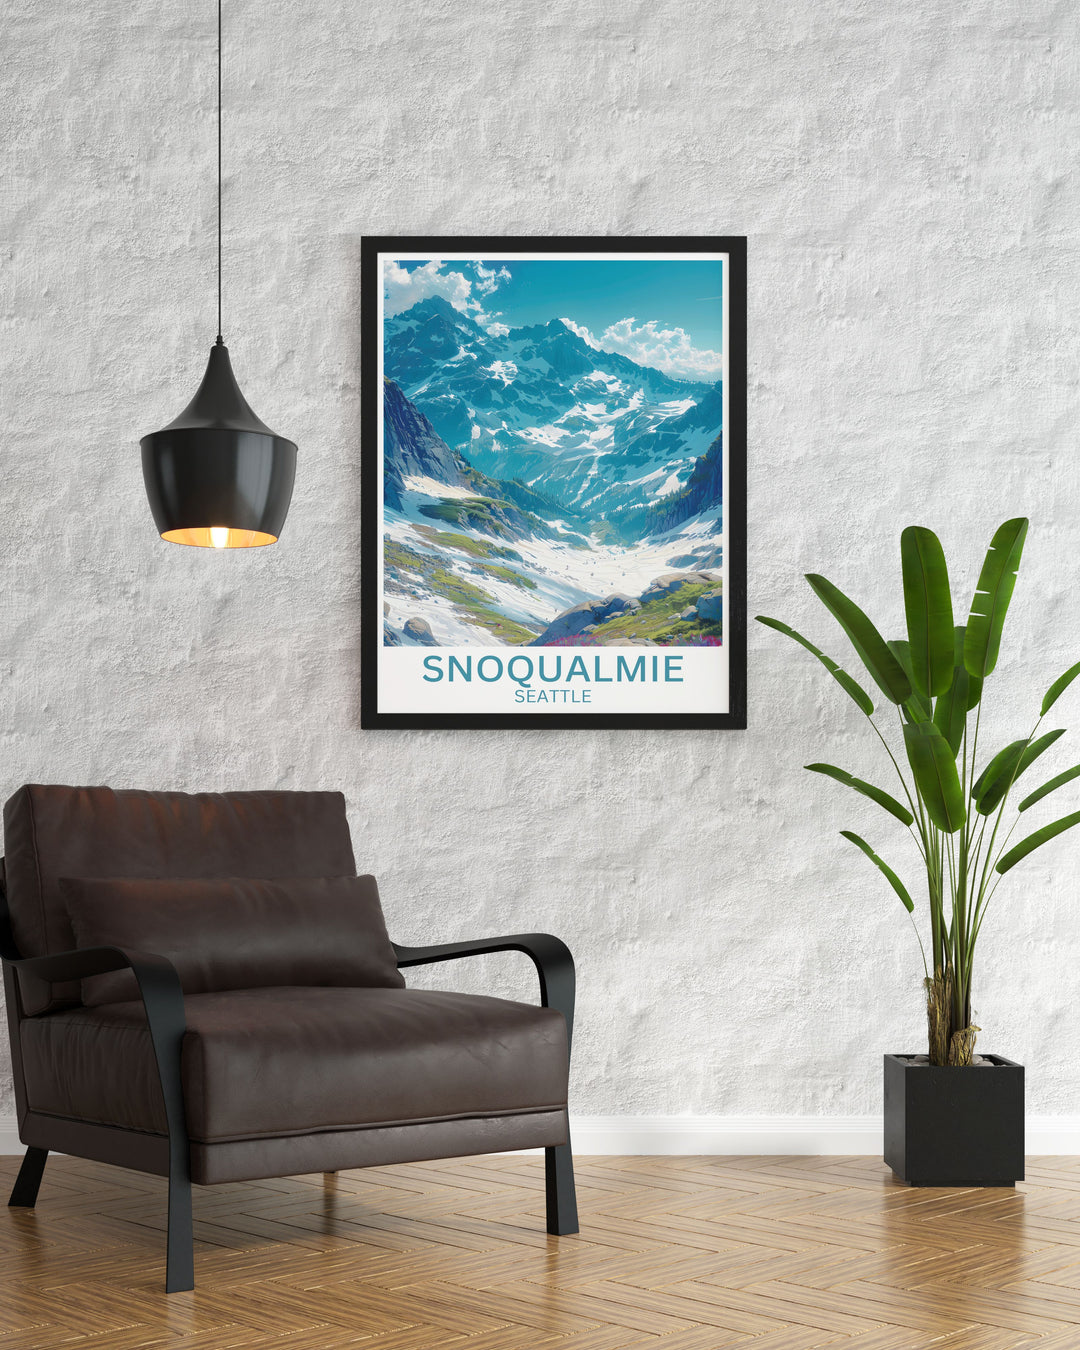 Celebrate the stunning scenery of The Summit at Snoqualmie with this detailed art print, showcasing the serene snow covered mountains and exciting ski terrain.